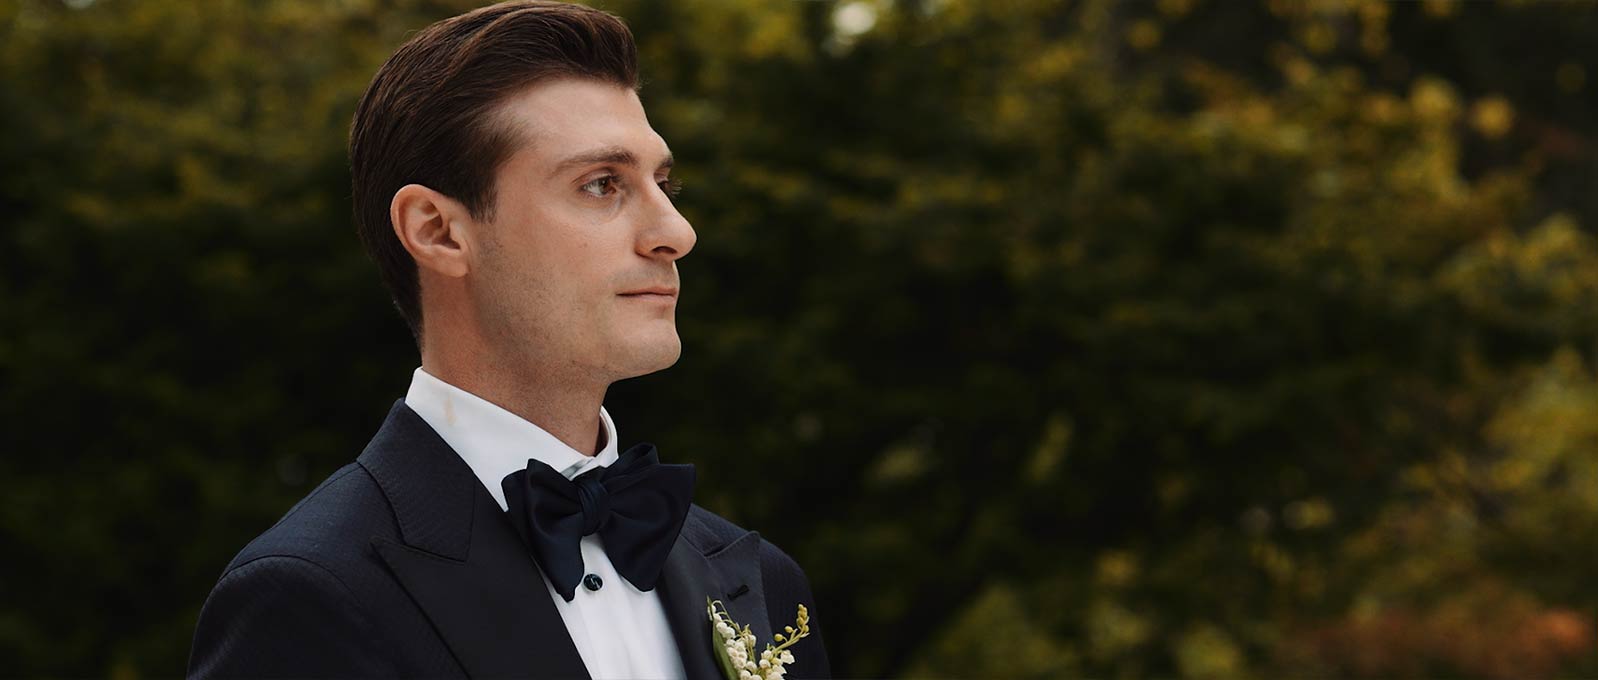 Groom reacts to his bride walking down the aisle during outdoor wedding ceremony